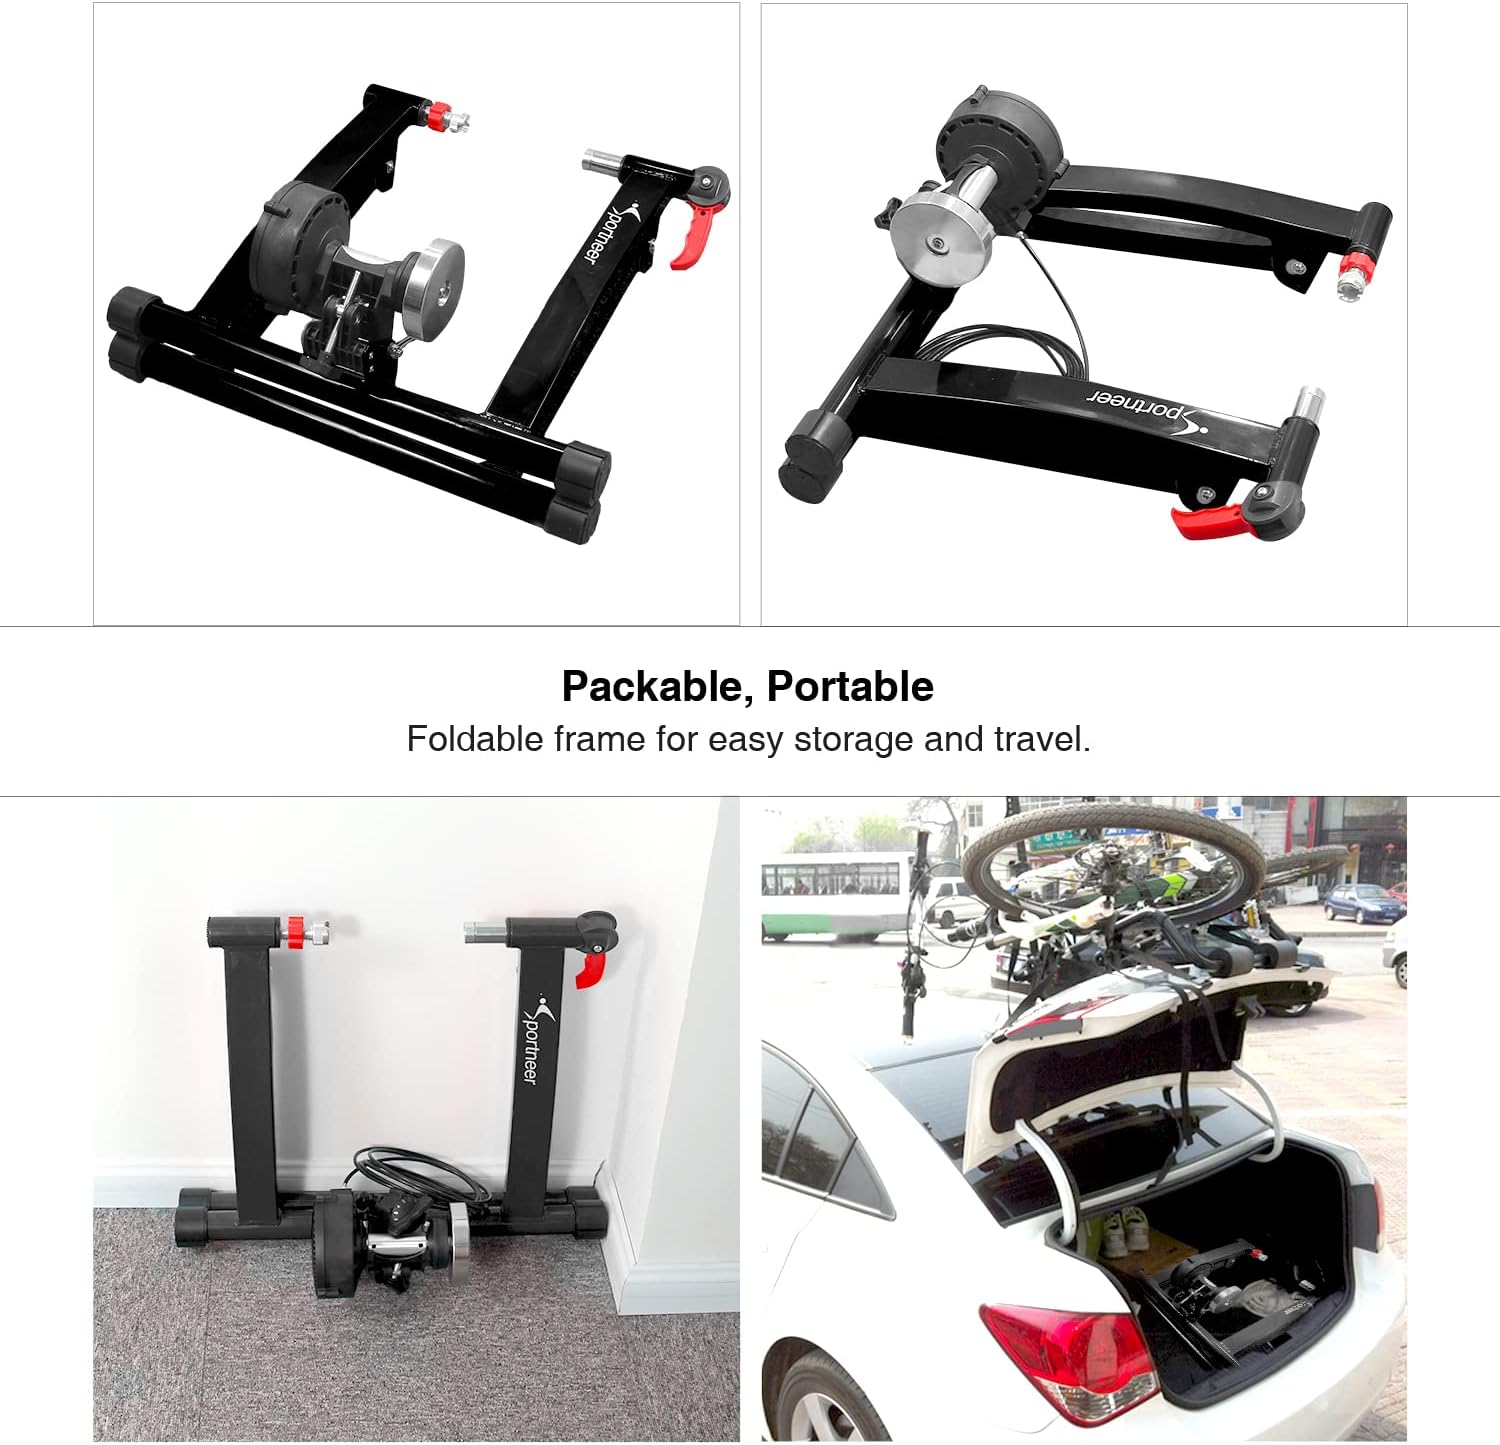 Sportneer Bike Trainer - Magnetic Stationary Bike Stand for 26-28  700C Wheels - Adjustable 6 Level Resistance Bike Trainer Stand for Indoor Riding with Quick Release Lever  Front Wheel Riser Block - Sportneer Bike Trainer Review